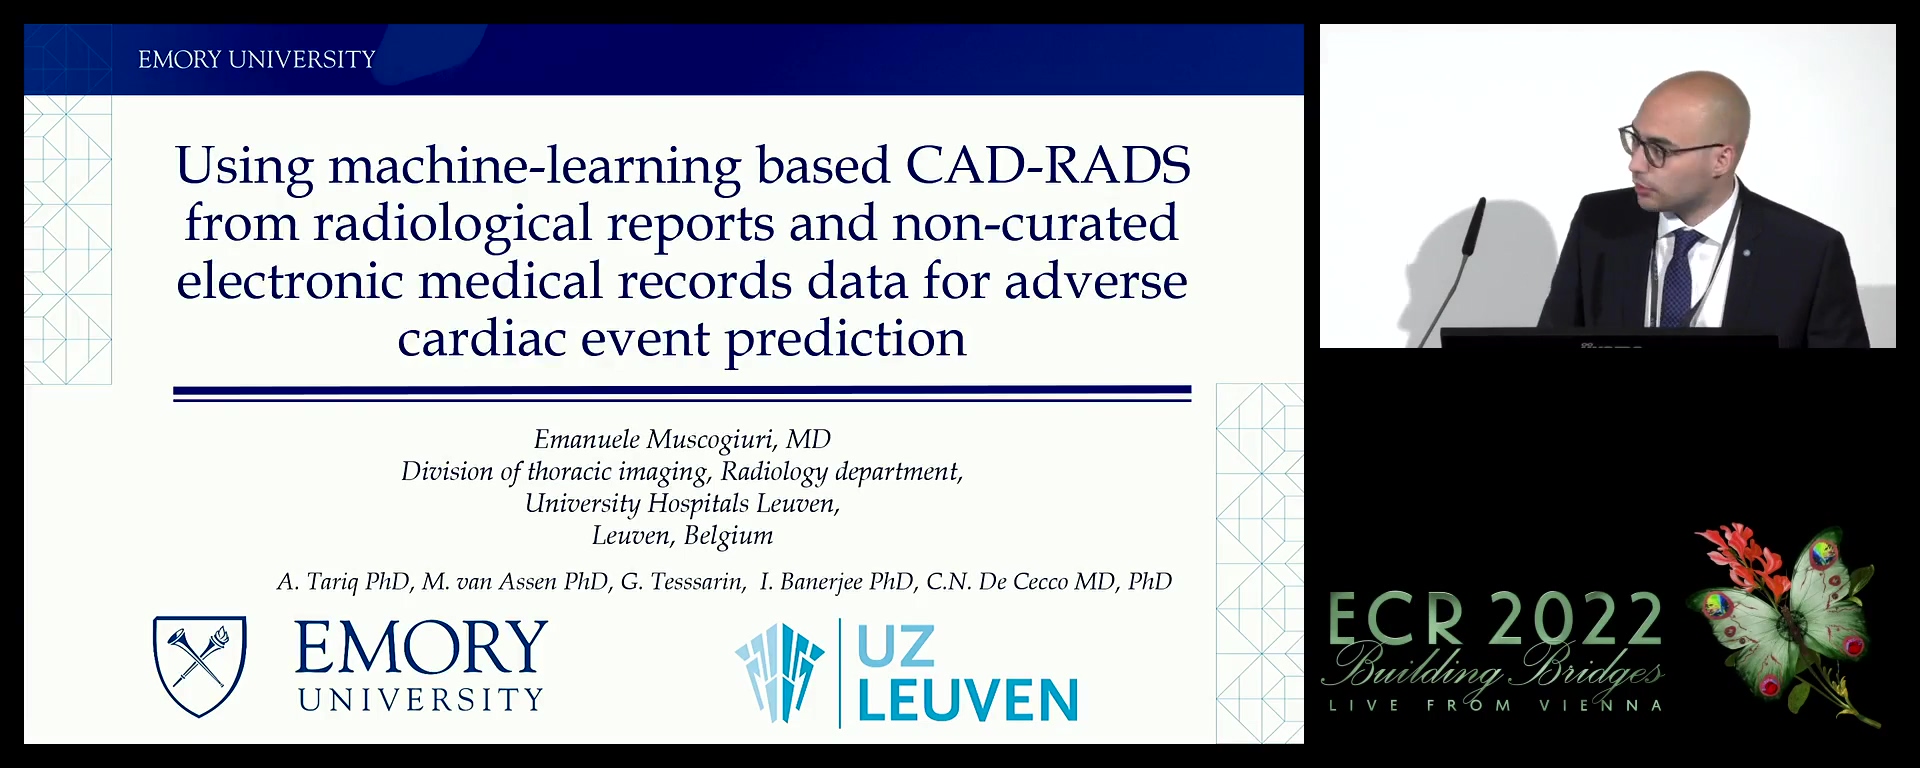 Using machine learning based CAD-RADS from radiological reports and non-curated electronic medical records data for adverse cardiac events prediction - Emanuele Muscogiuri, Roma / IT